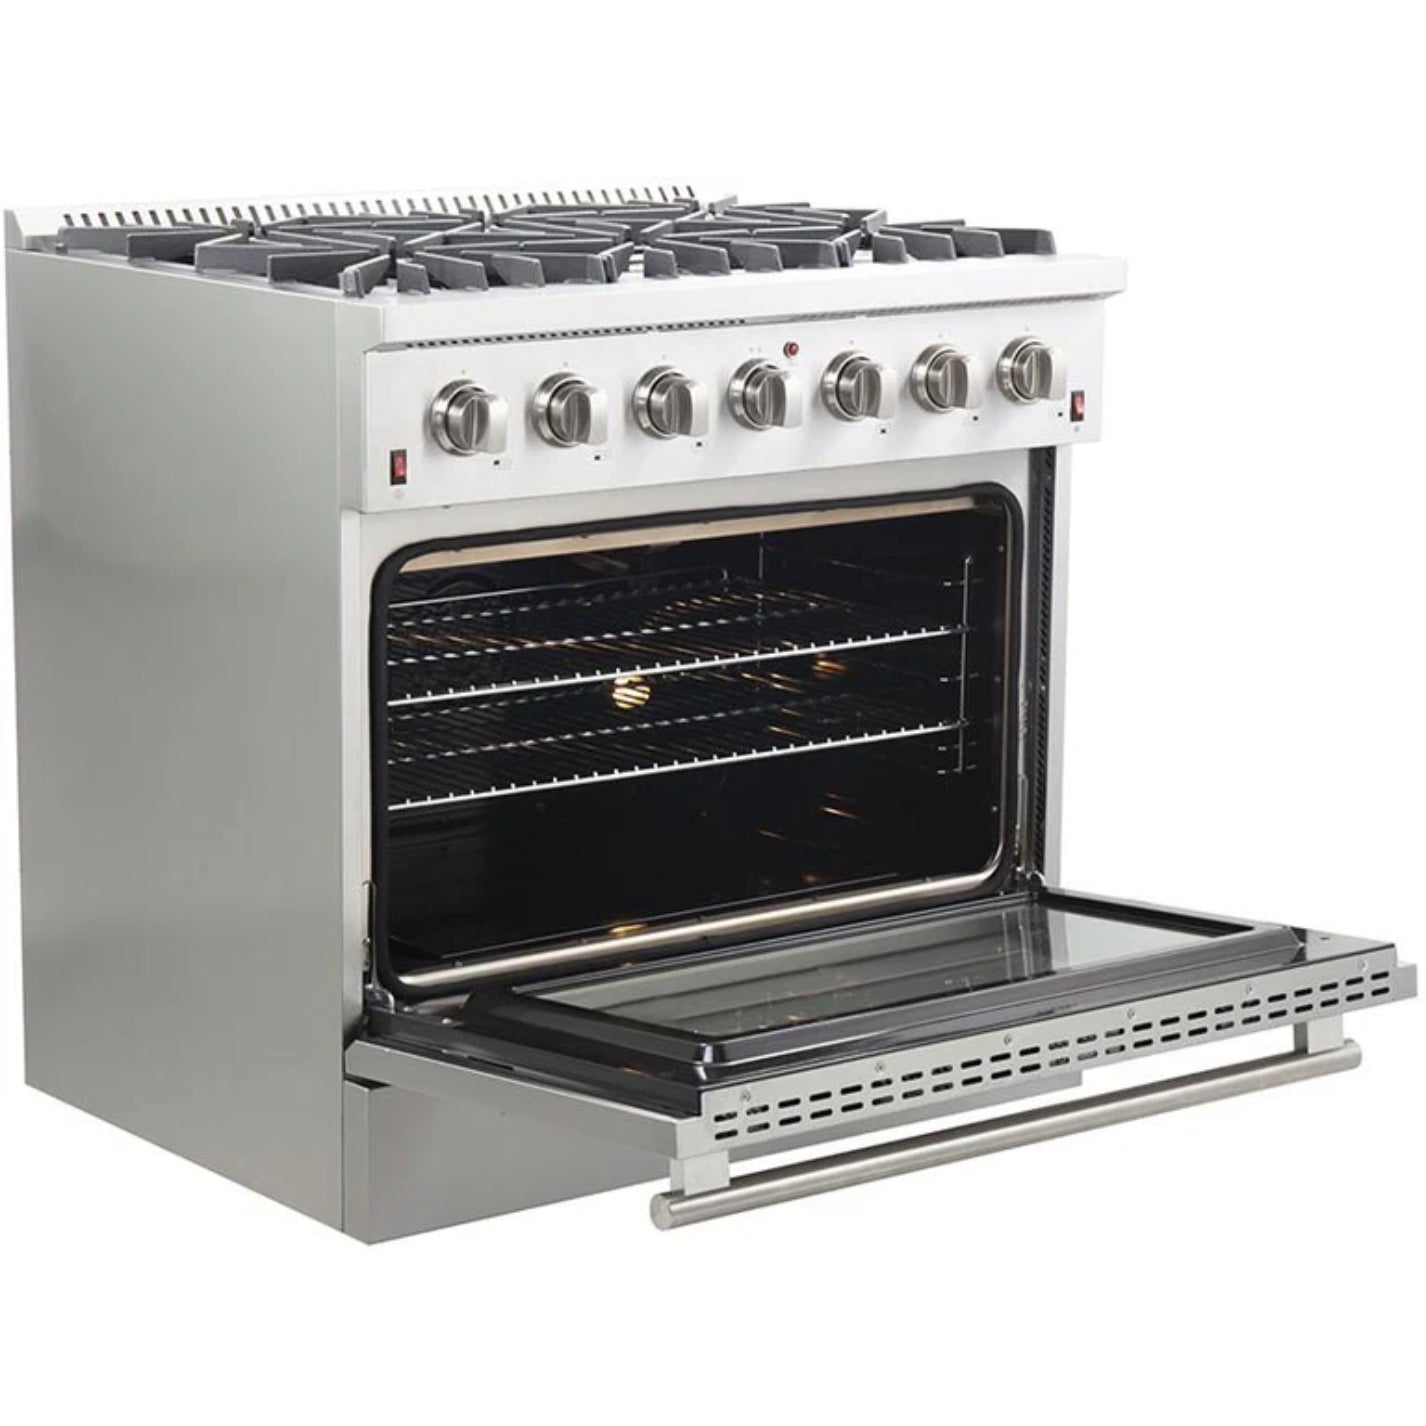 Forno Galiano 36-inch Freestanding Gas Range Stainless Steel, 6 Burners, 5.36 cu.ft. Convection Oven, FFSGS6244-36